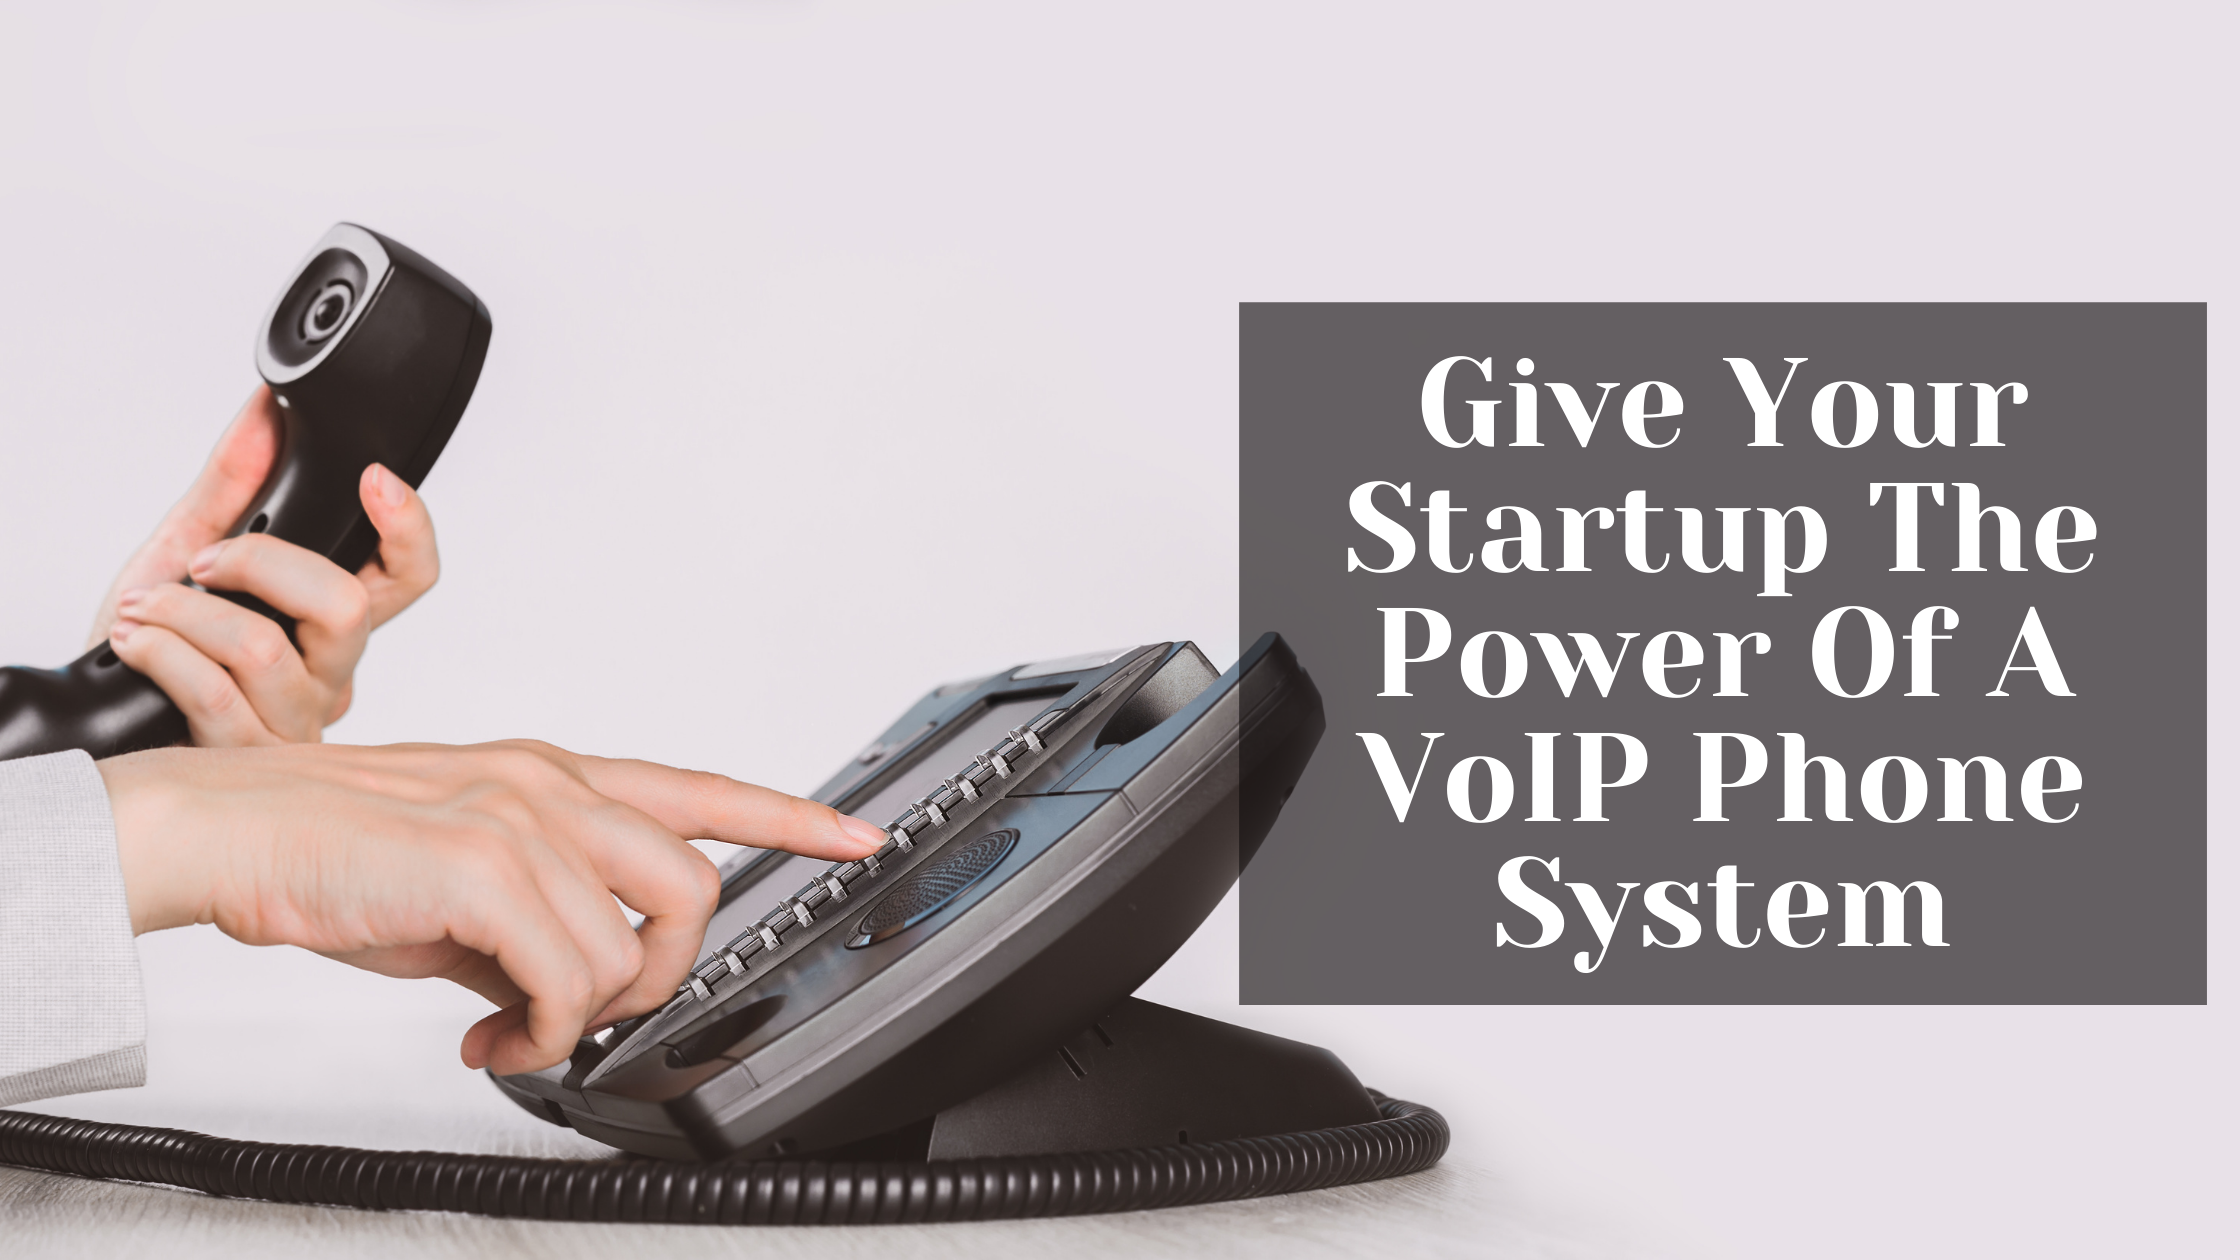 Give Your Startup The Power Of A VoIP Phone System